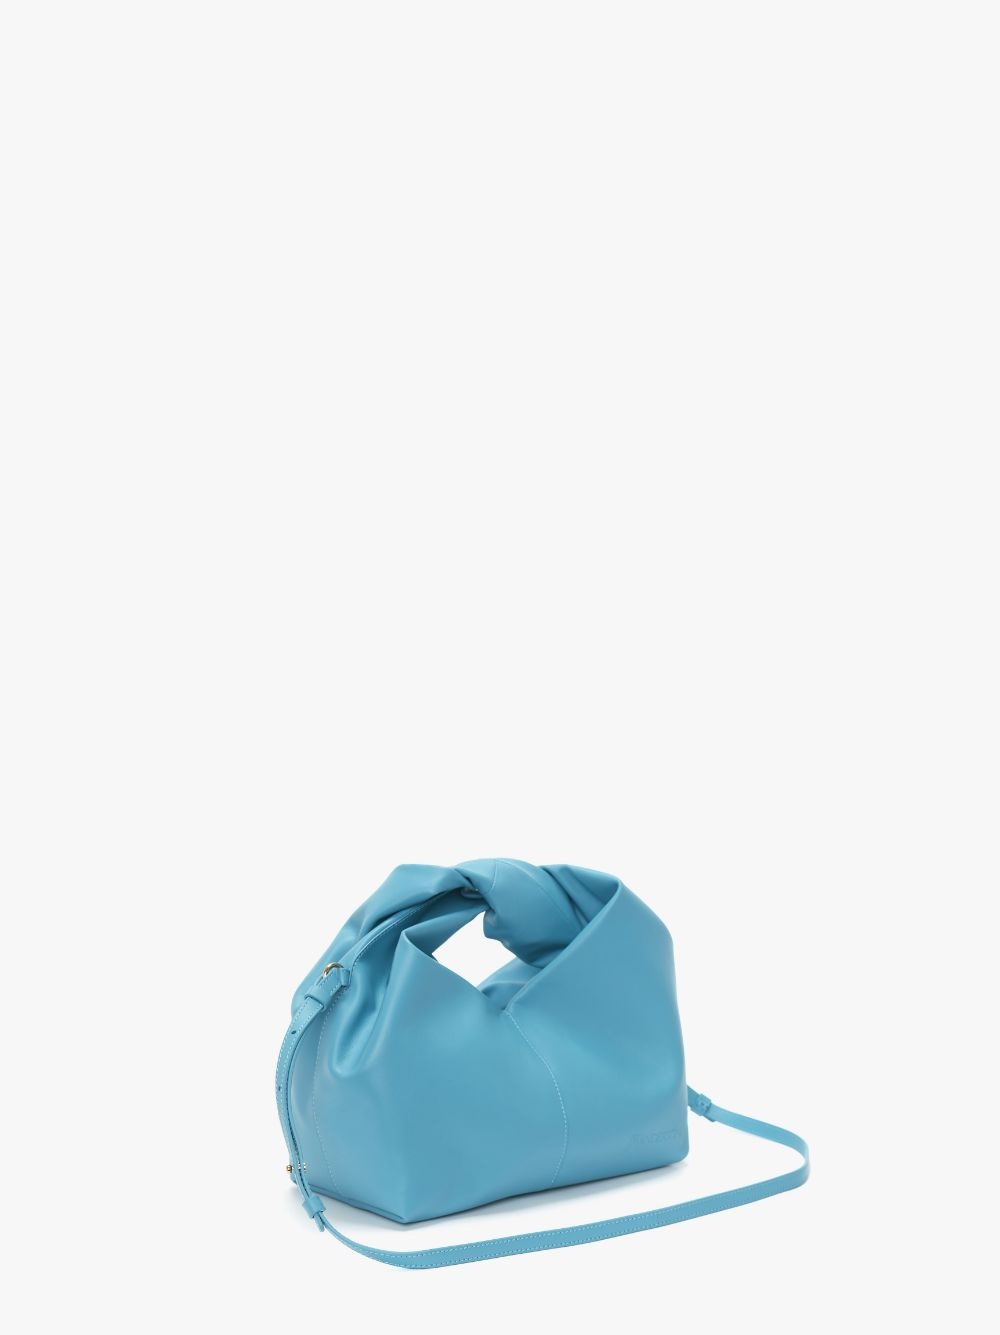 MINI TWISTER HOBO WITH STRAP - LEATHER CROSSBODY BAG - 2